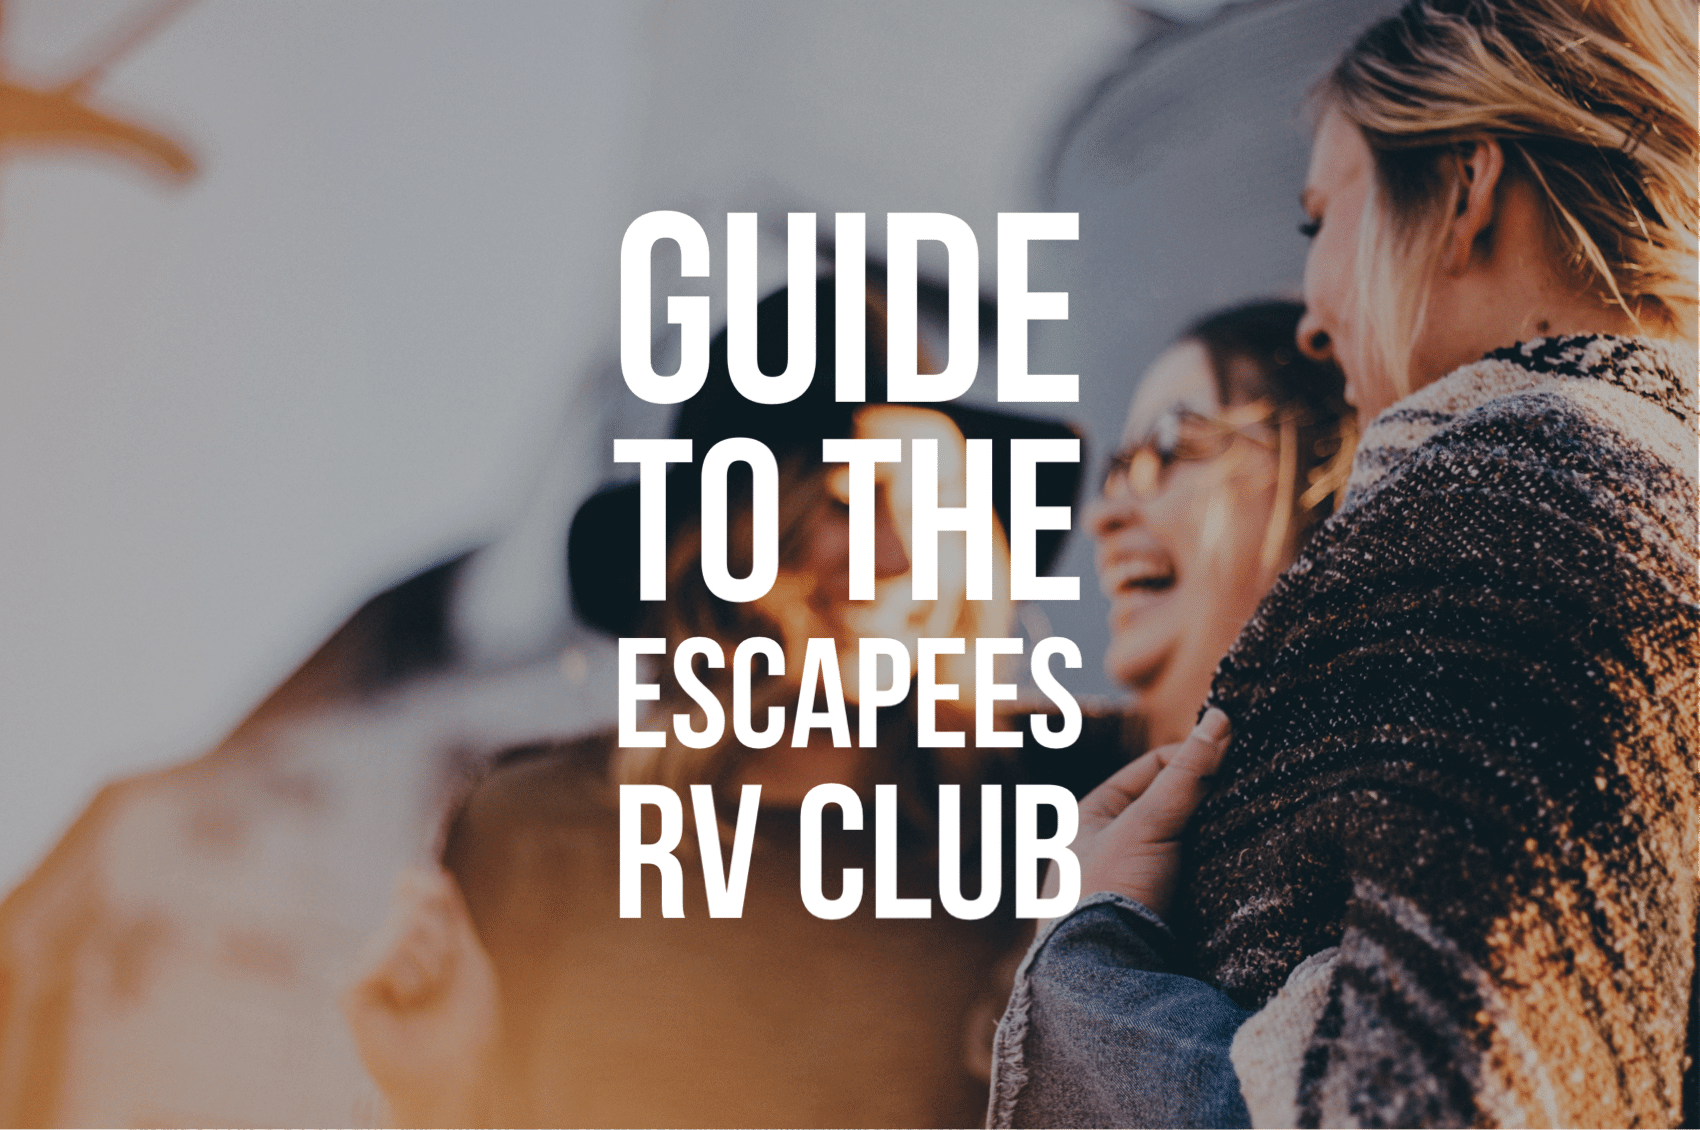 Guide to the Escapees RV Club